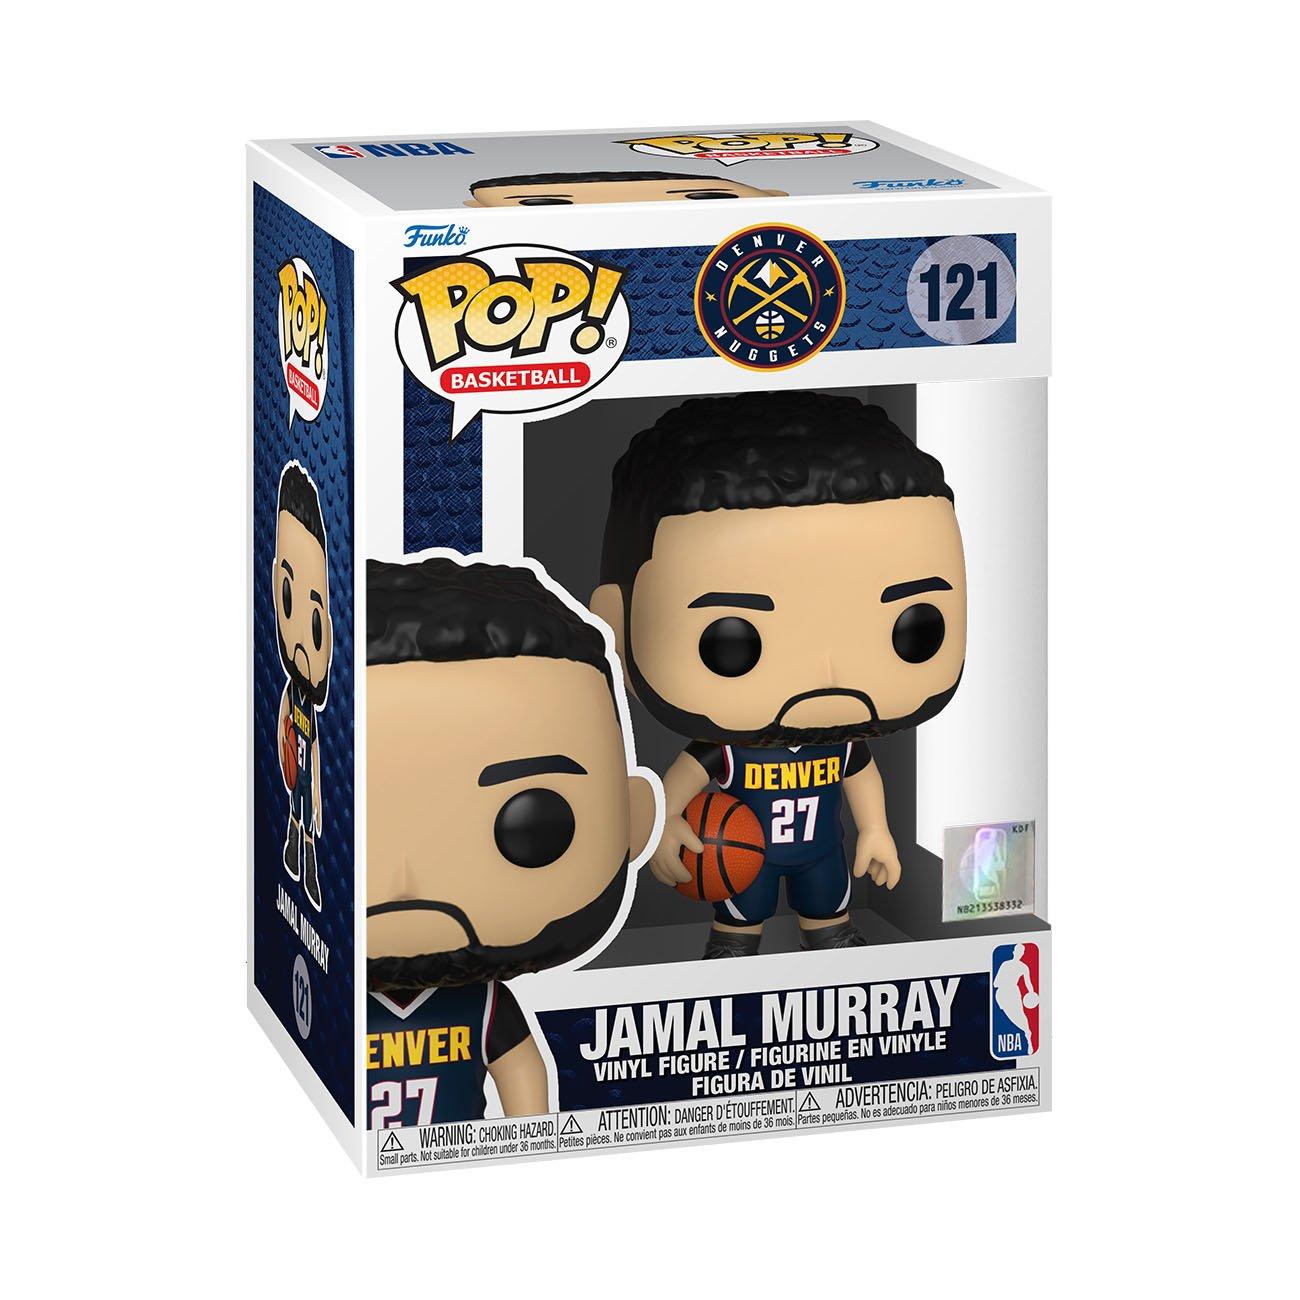 Denver Nuggets Funko 2023 NBA Finals Champions POP! Five-Pack With